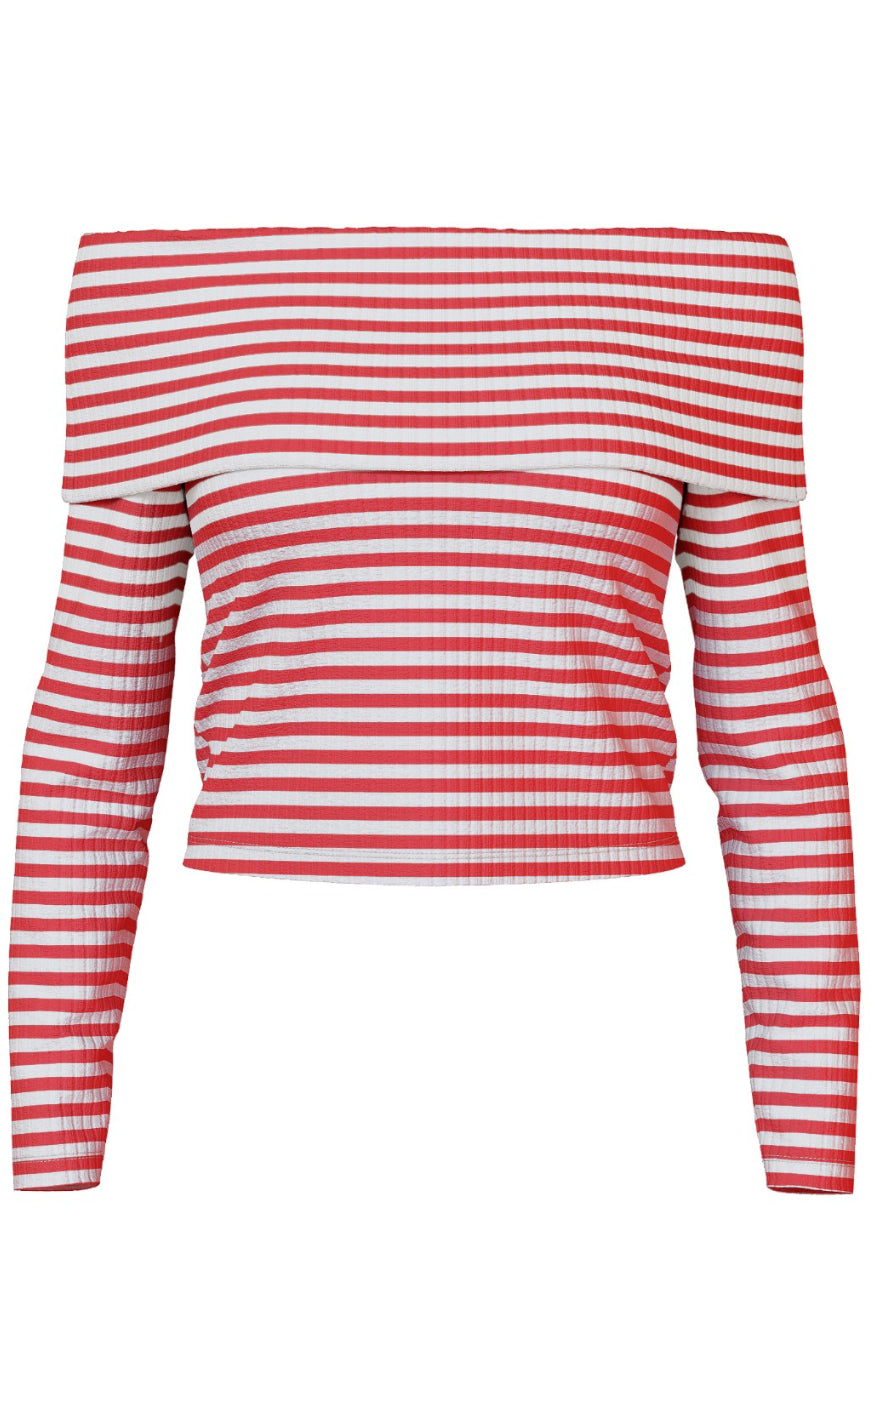 Se Pieces Bluse - Laya - Bright White/High Risk Red hos Mulieres.dk